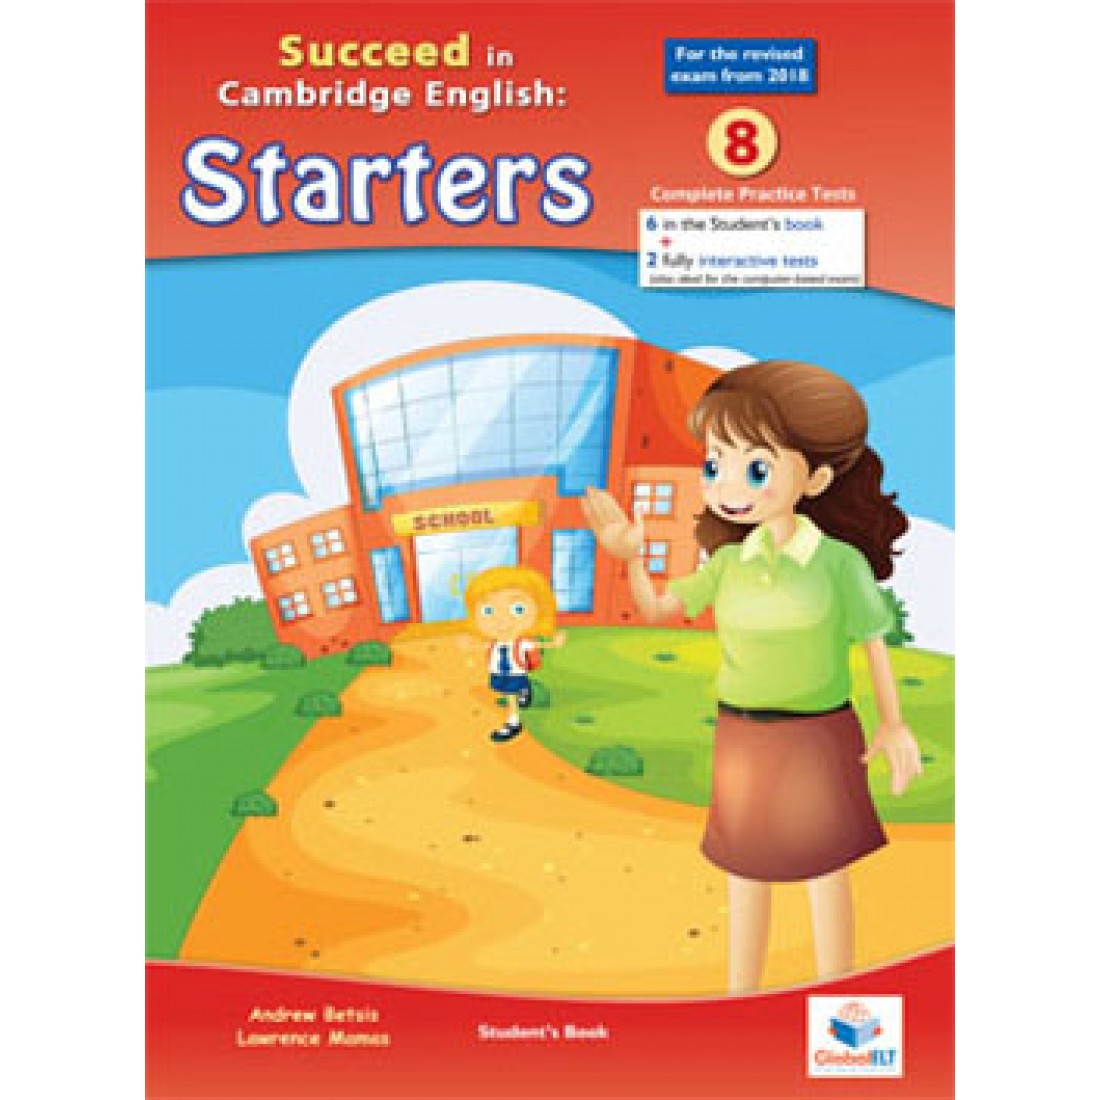 Succeed in Cambridge English STARTERS | Andrew Betsis, Lawrence Mamas